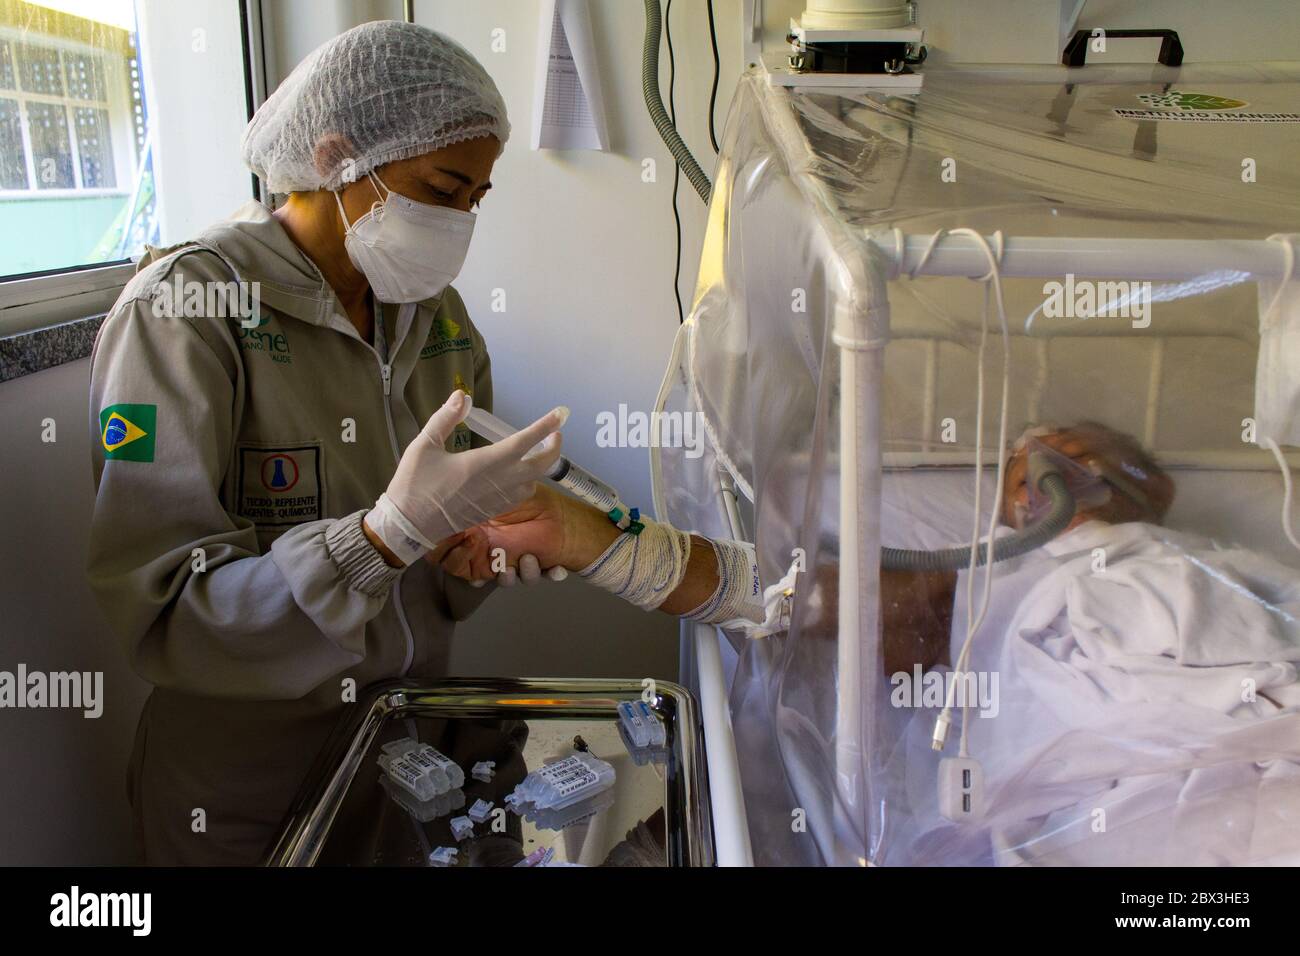 Manaus, Brazil. 04th June, 2020. A nurse is treating a patient at Gilberto Novaes Municipal Field Hospital. The field hospital was set up in a school and has 180 beds, including 38 intensive care beds. Credit: Lucas Silva/dpa/Alamy Live News Stock Photo